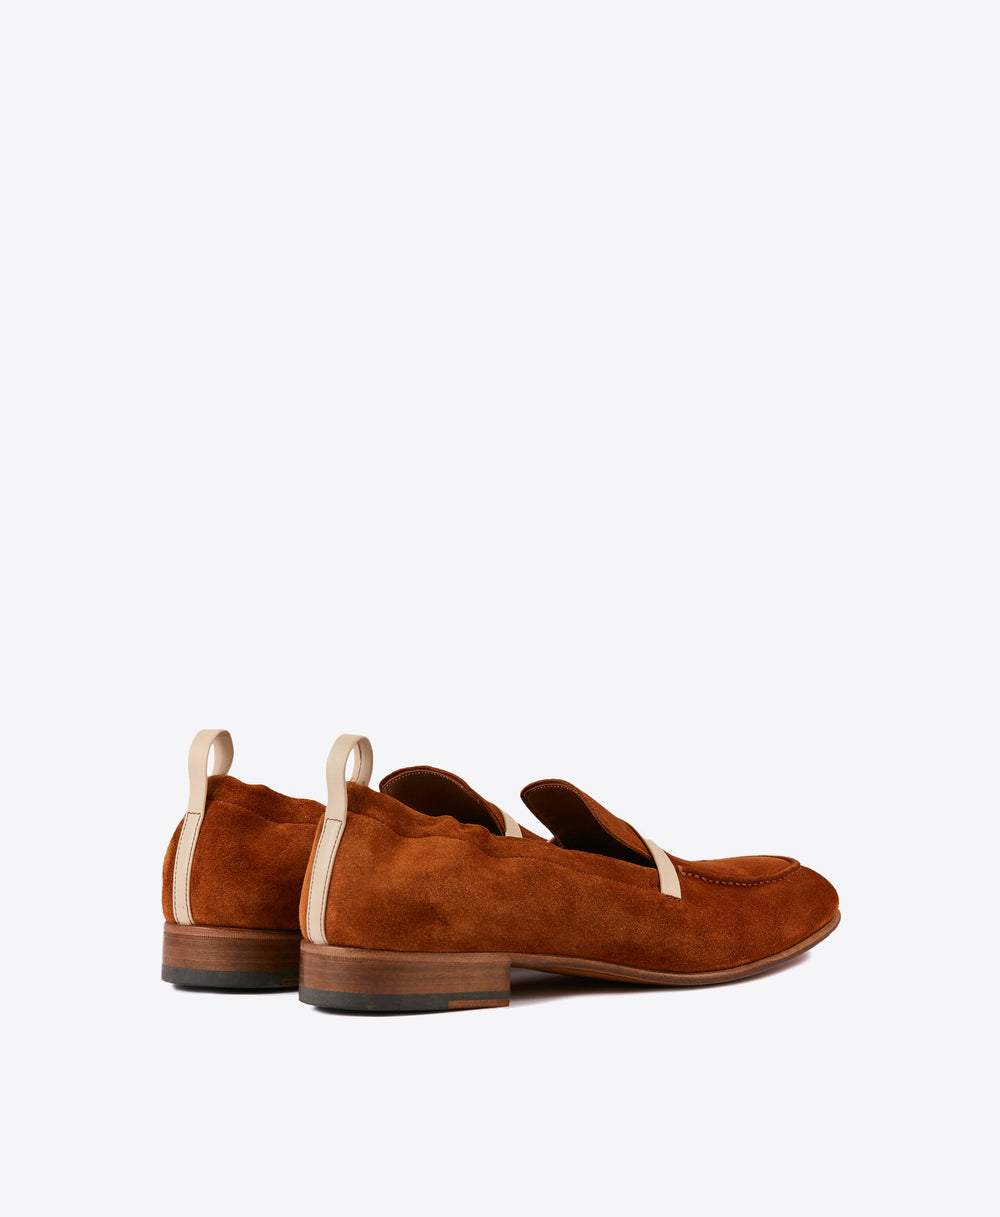 Men's Malone Souliers Caramel Brown Suede Loafers